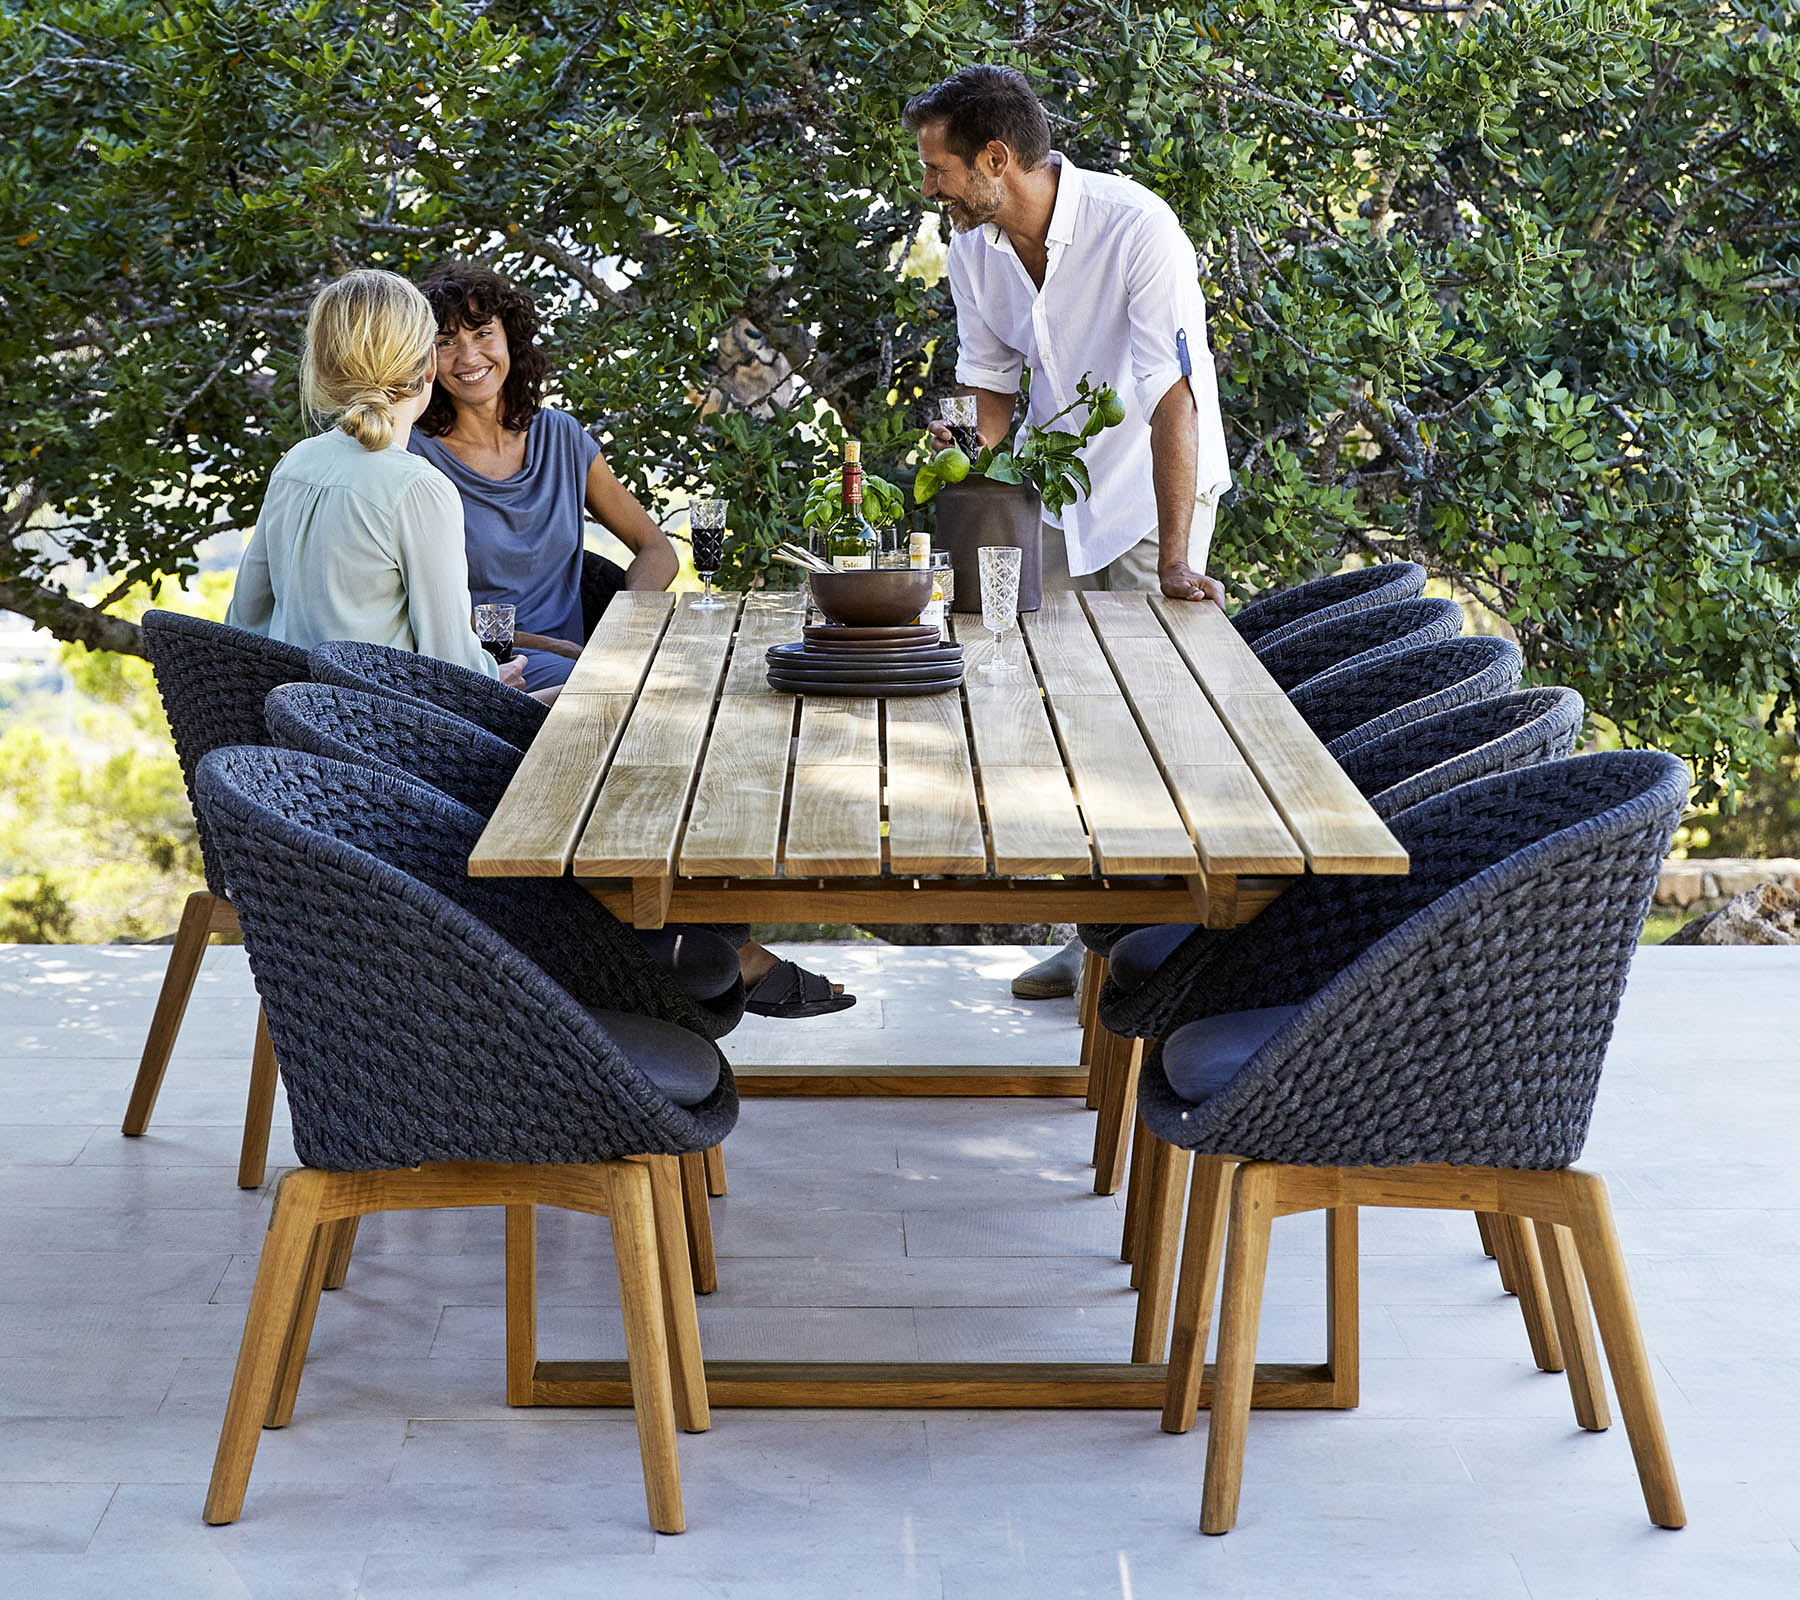 Boxhill's Endless Outdoor Rectangular Dining Table lifestyle image with dining chairs and 3 people having a chat